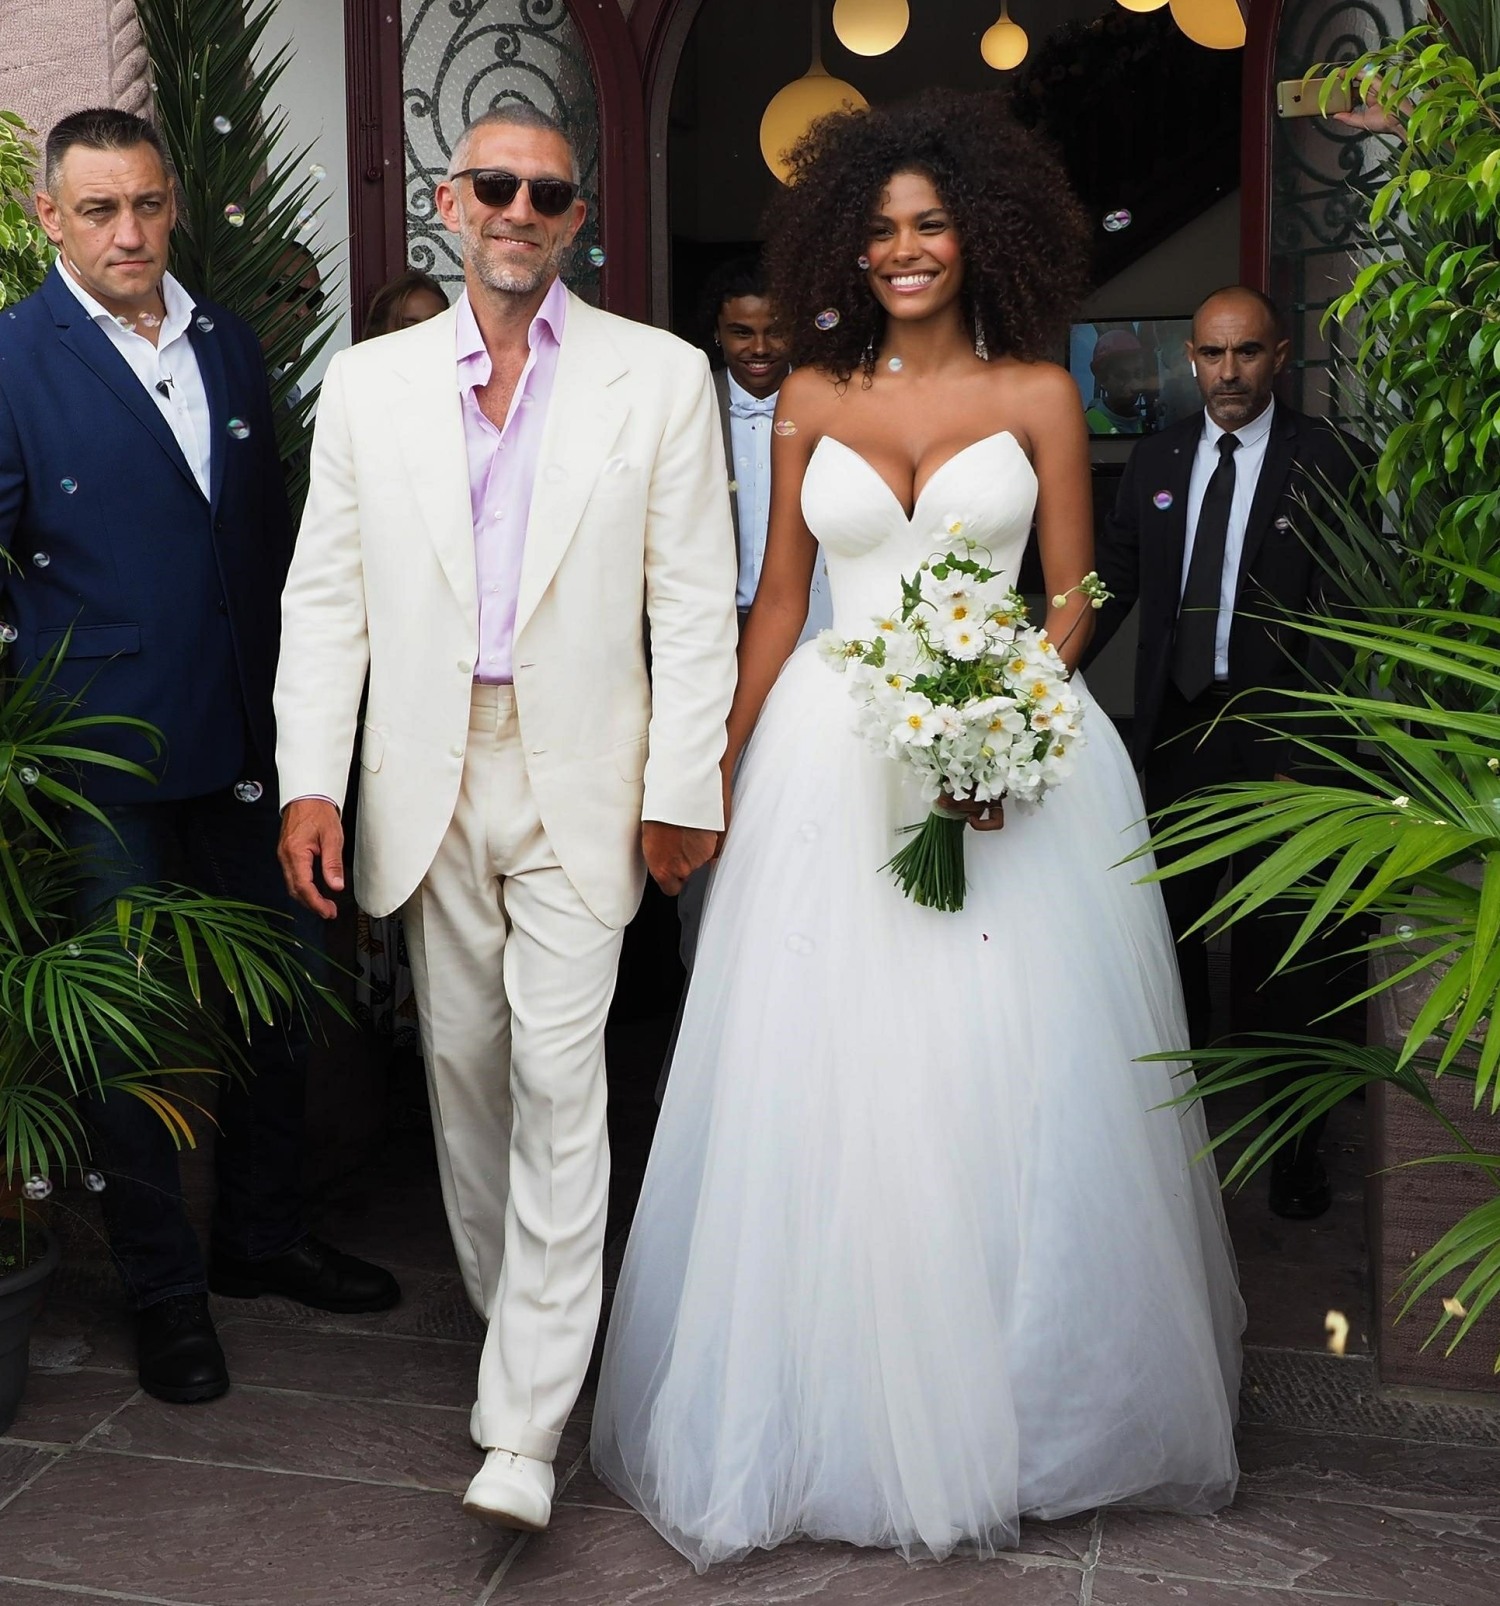 Vincent Cassel and Tina Kunakey tie the knot in the Basque Country